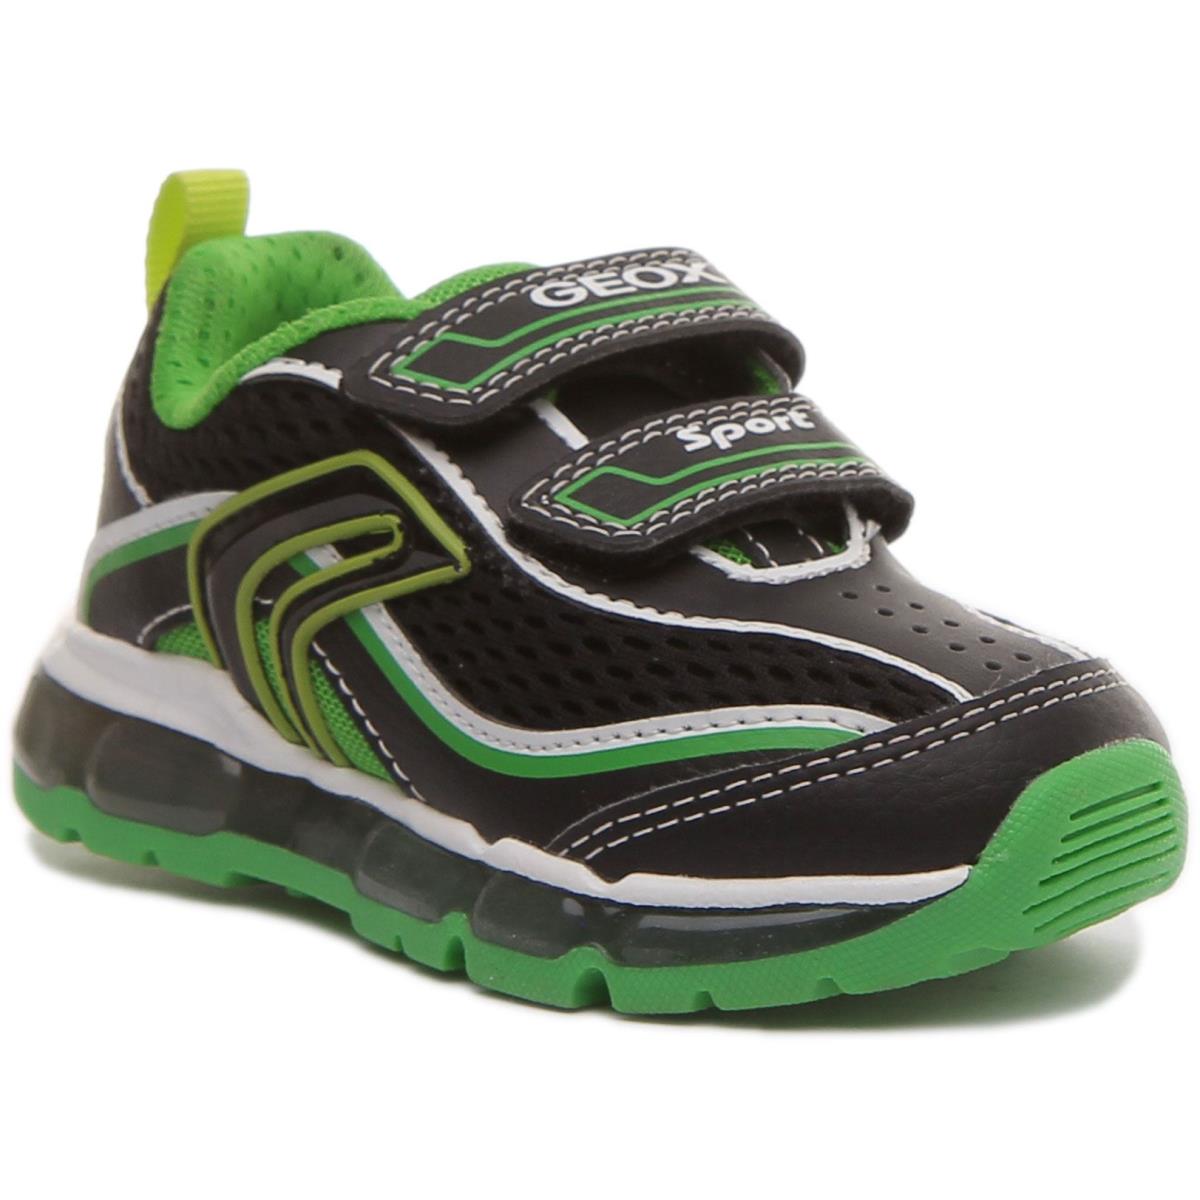 Geox J Android B.c Boys Two Strap Light Up Sneaker In Black Green Size US 8C- 4Y